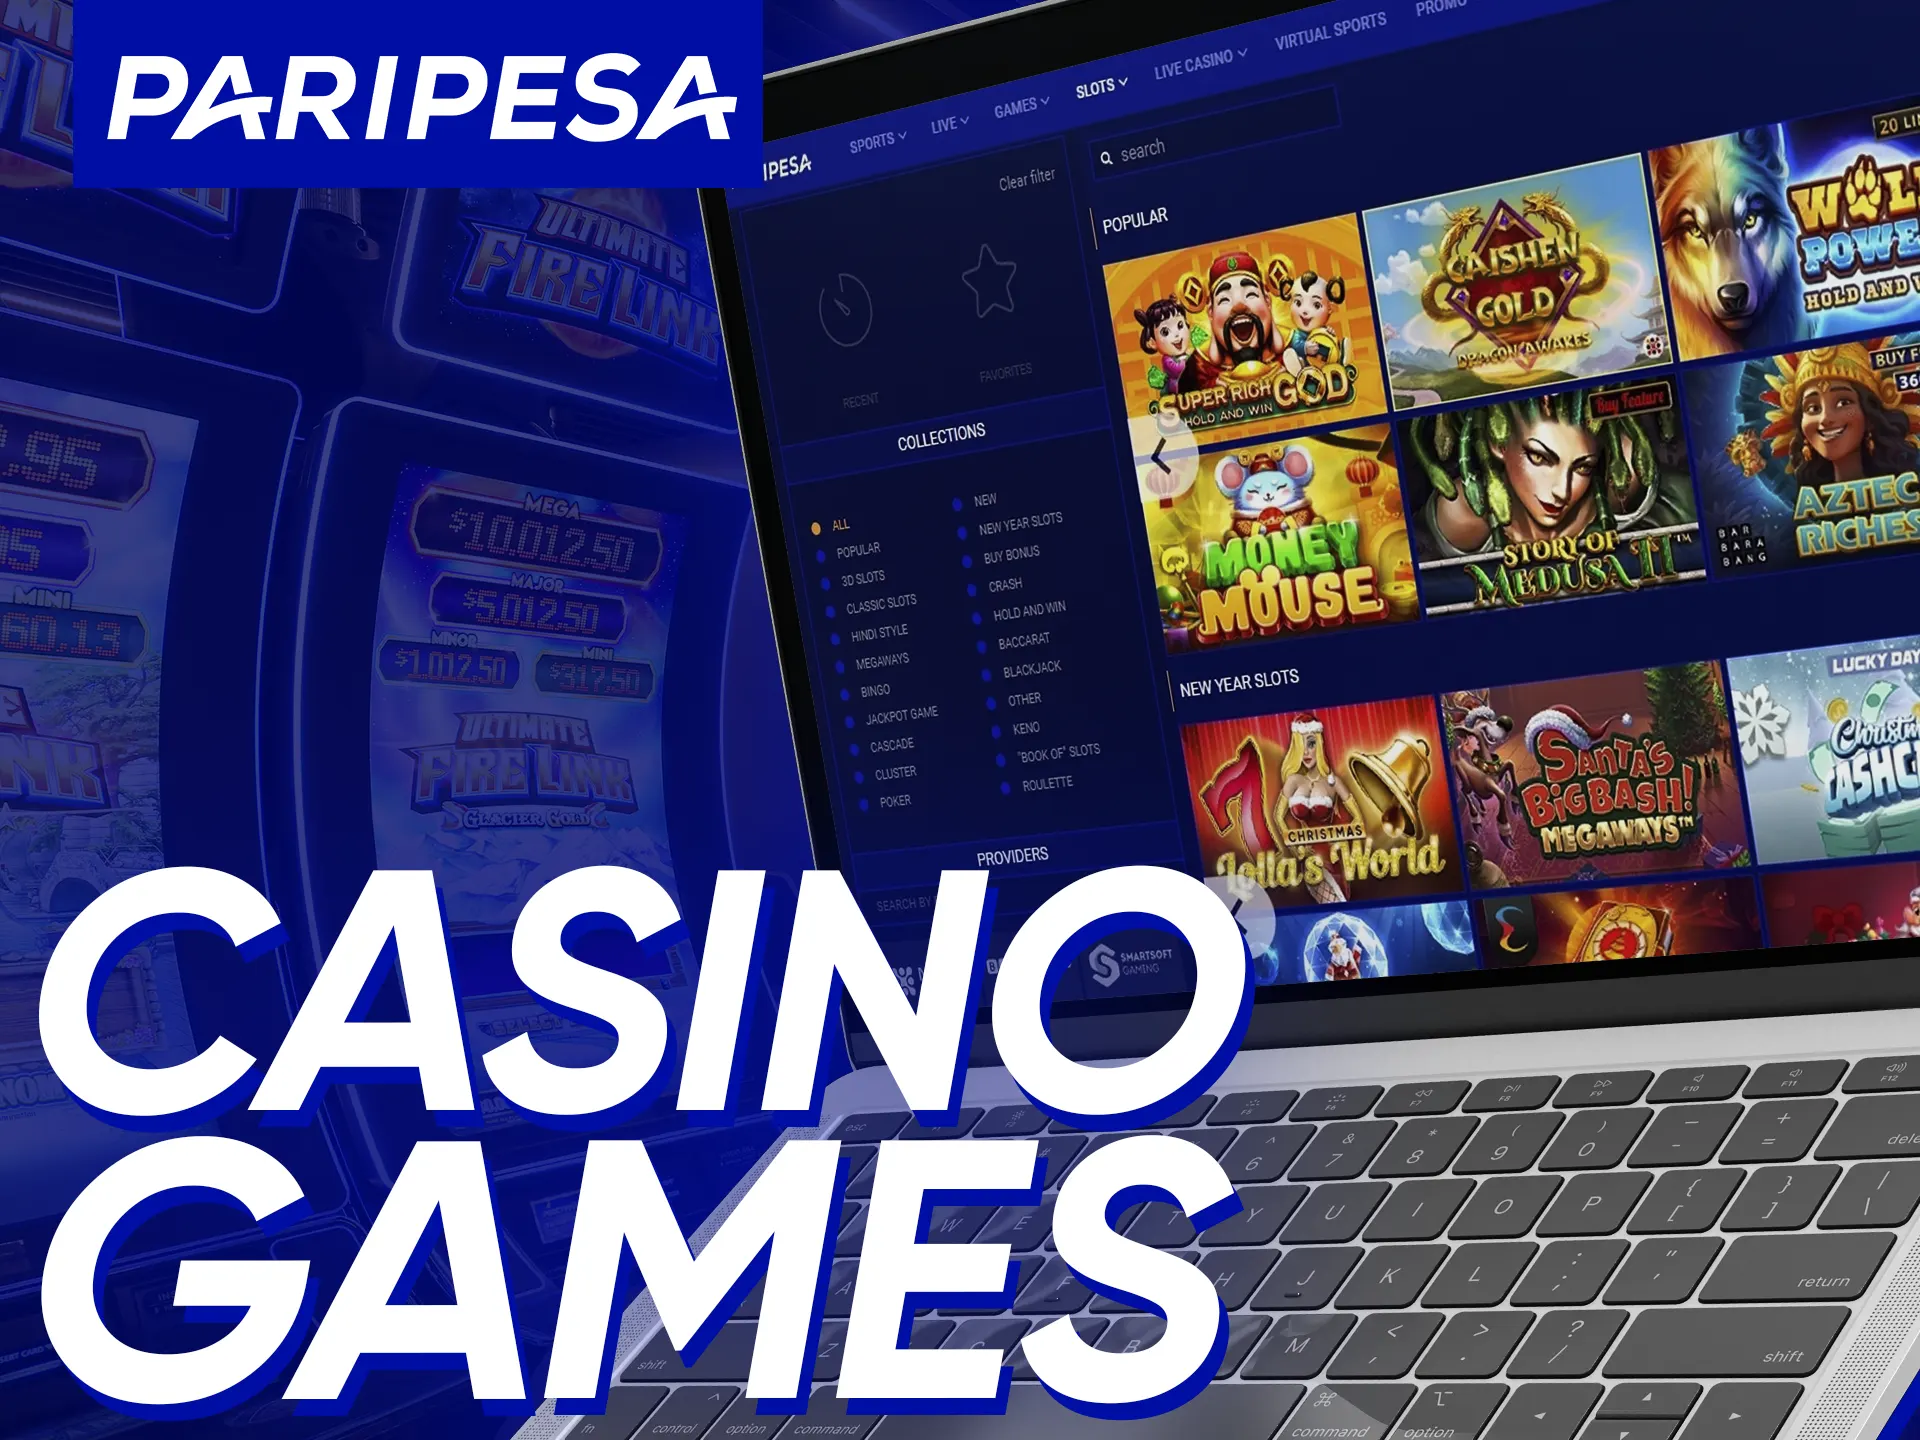 Paripesa Games: 111+ providers, diverse slots with various themes, features, and mechanics.